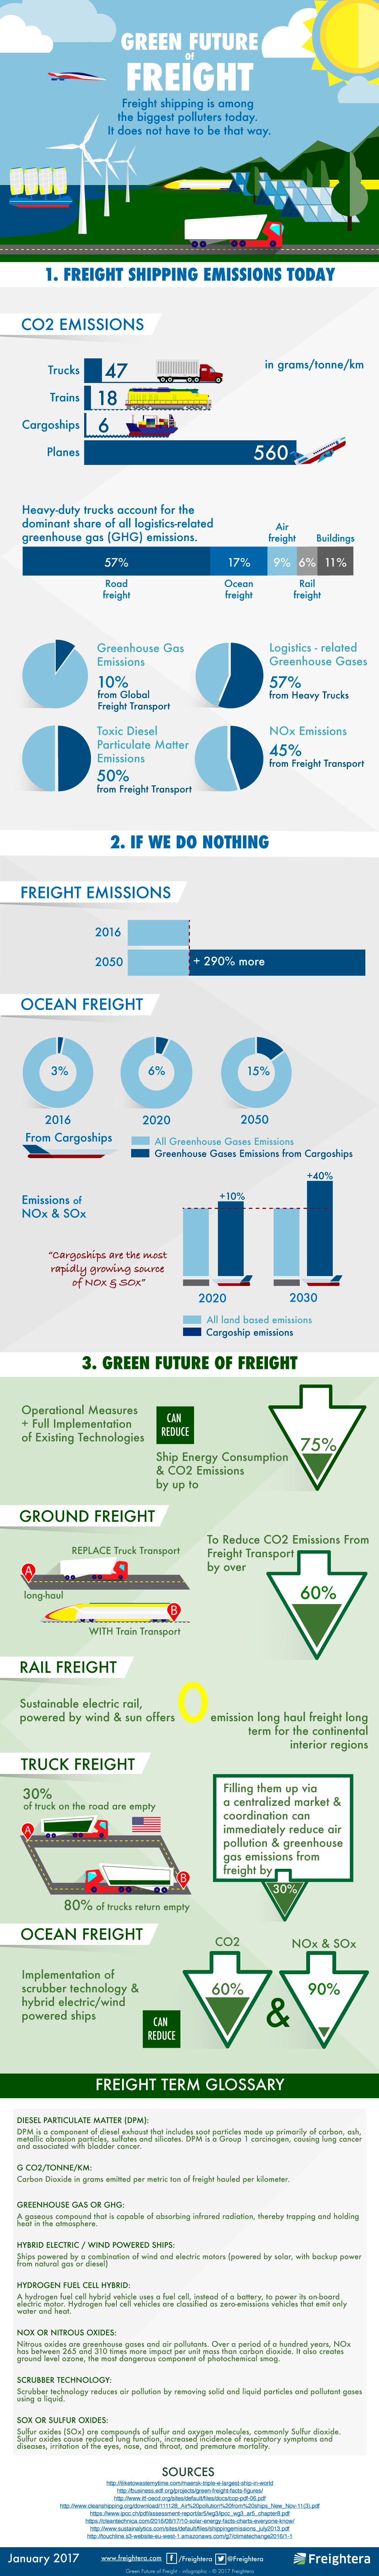 Infographic on The Green Future of Freight